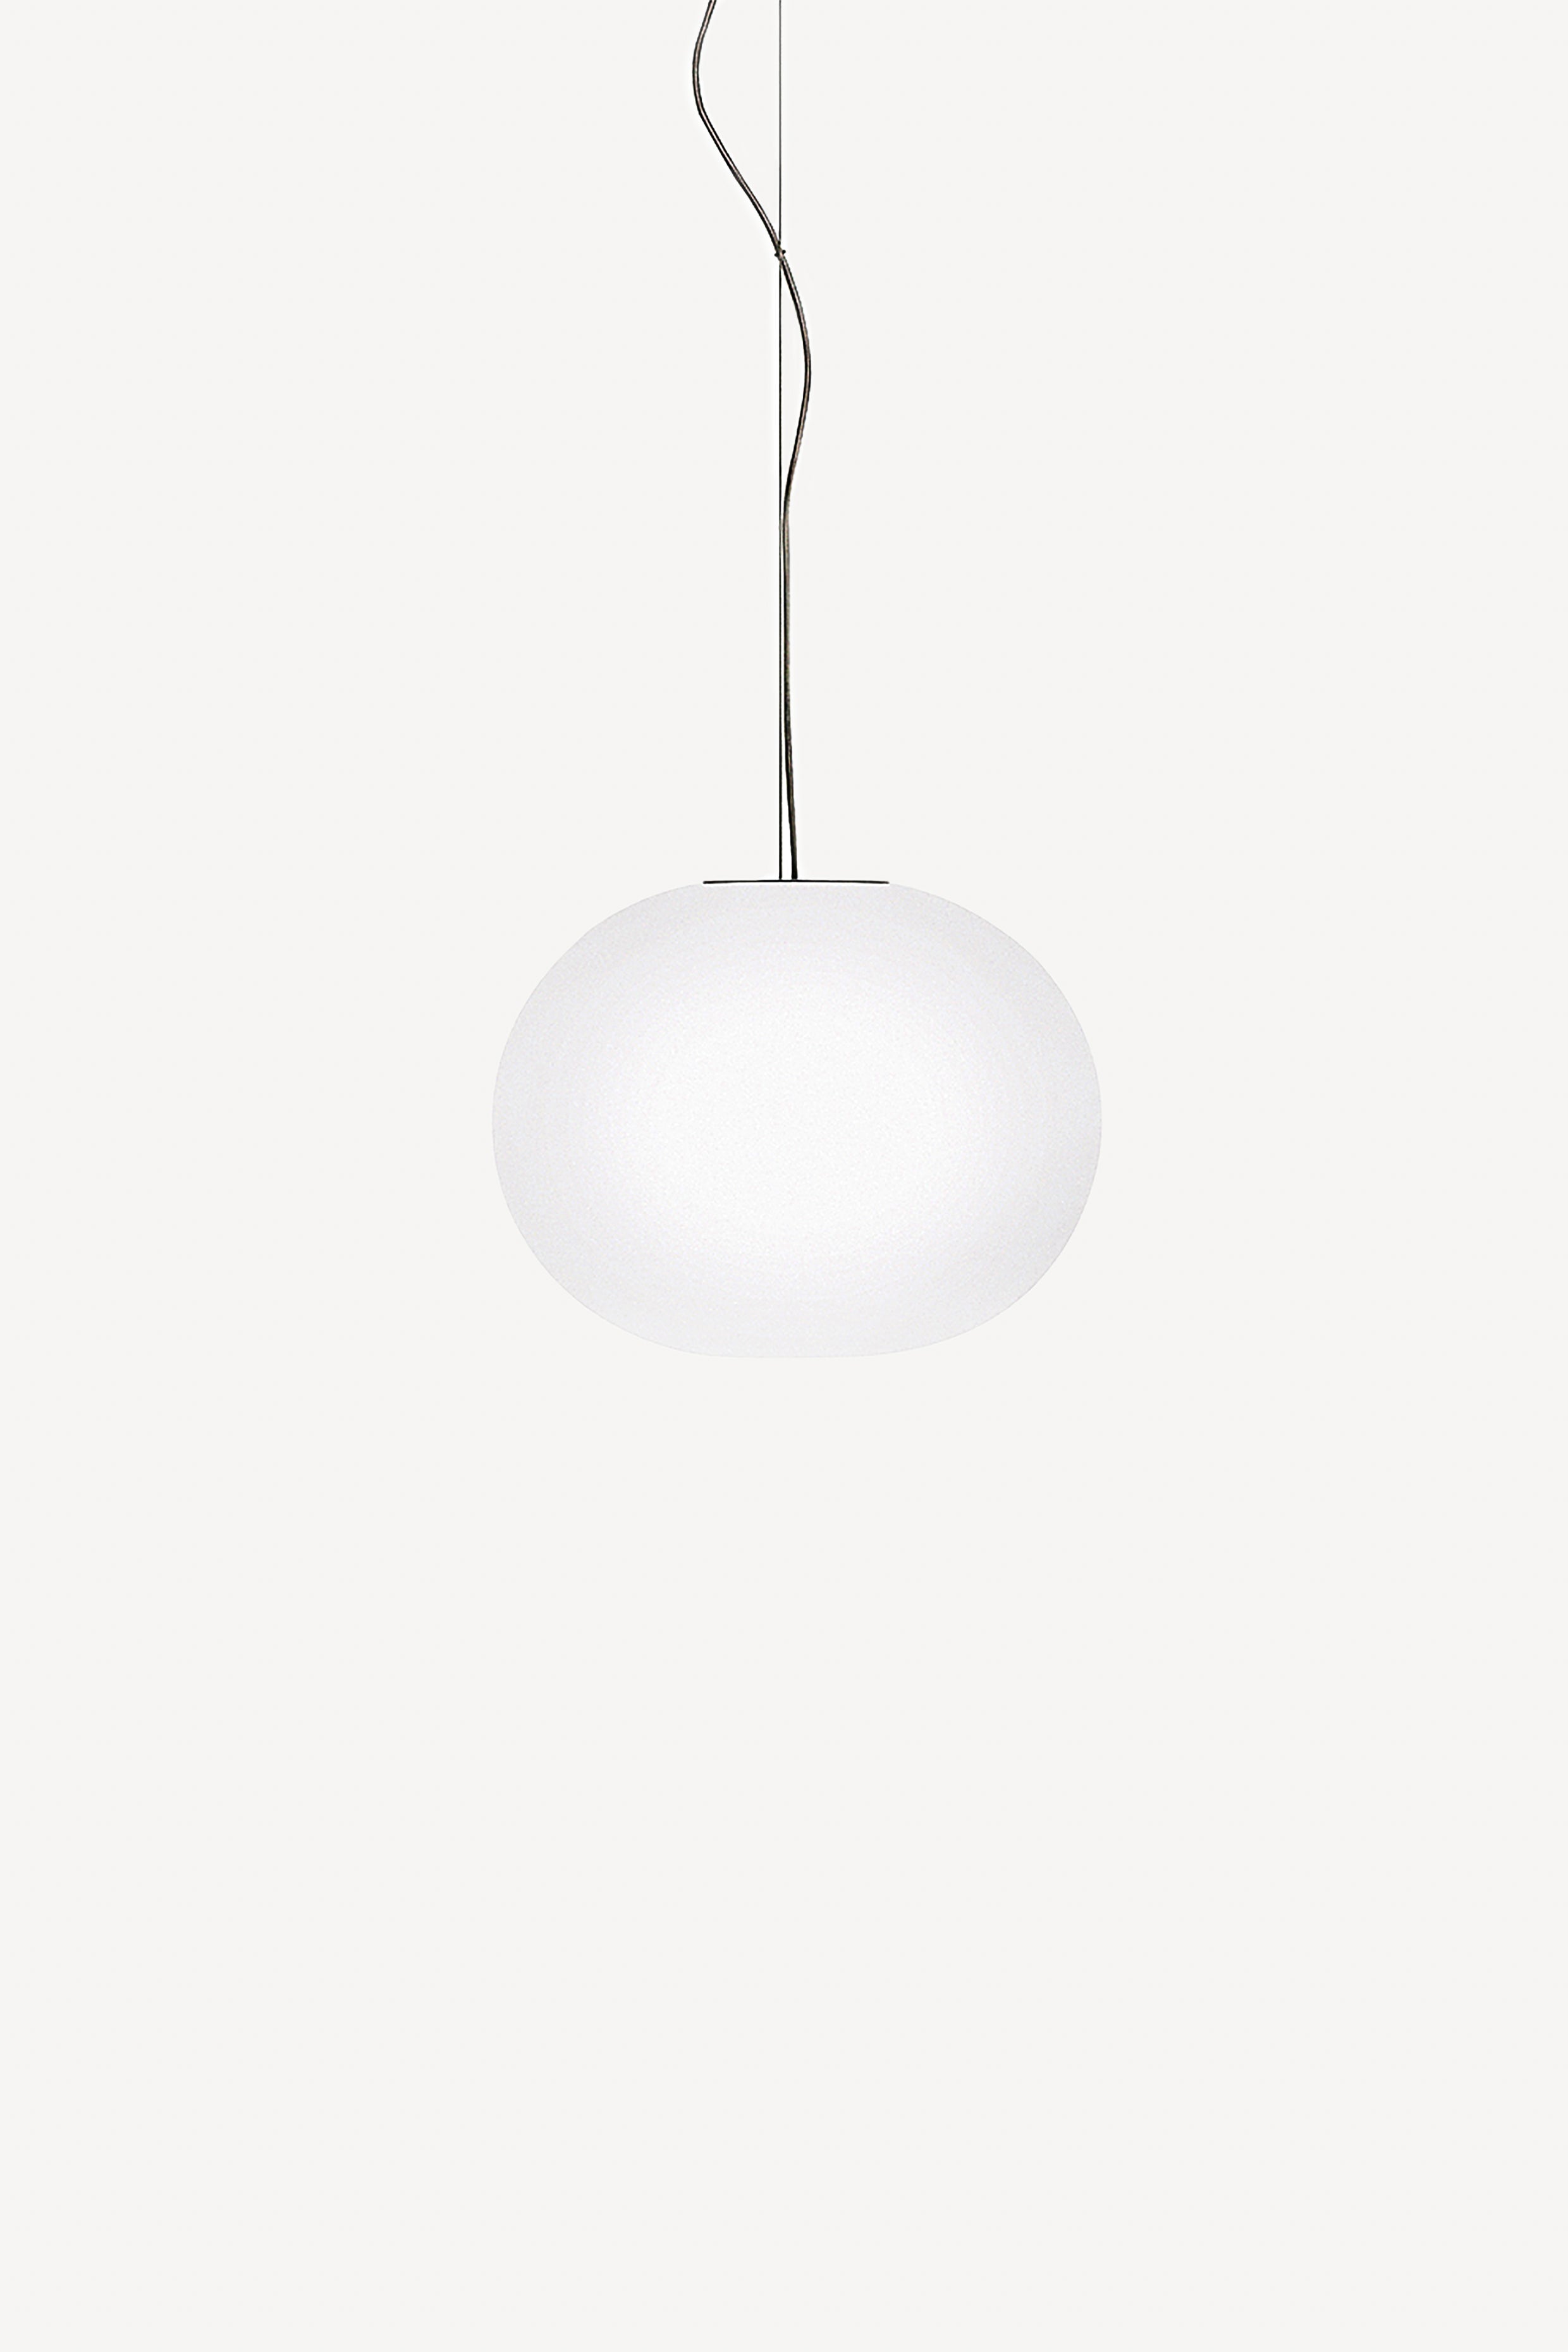 Glo-Ball S1 - Suspended Pendant, –